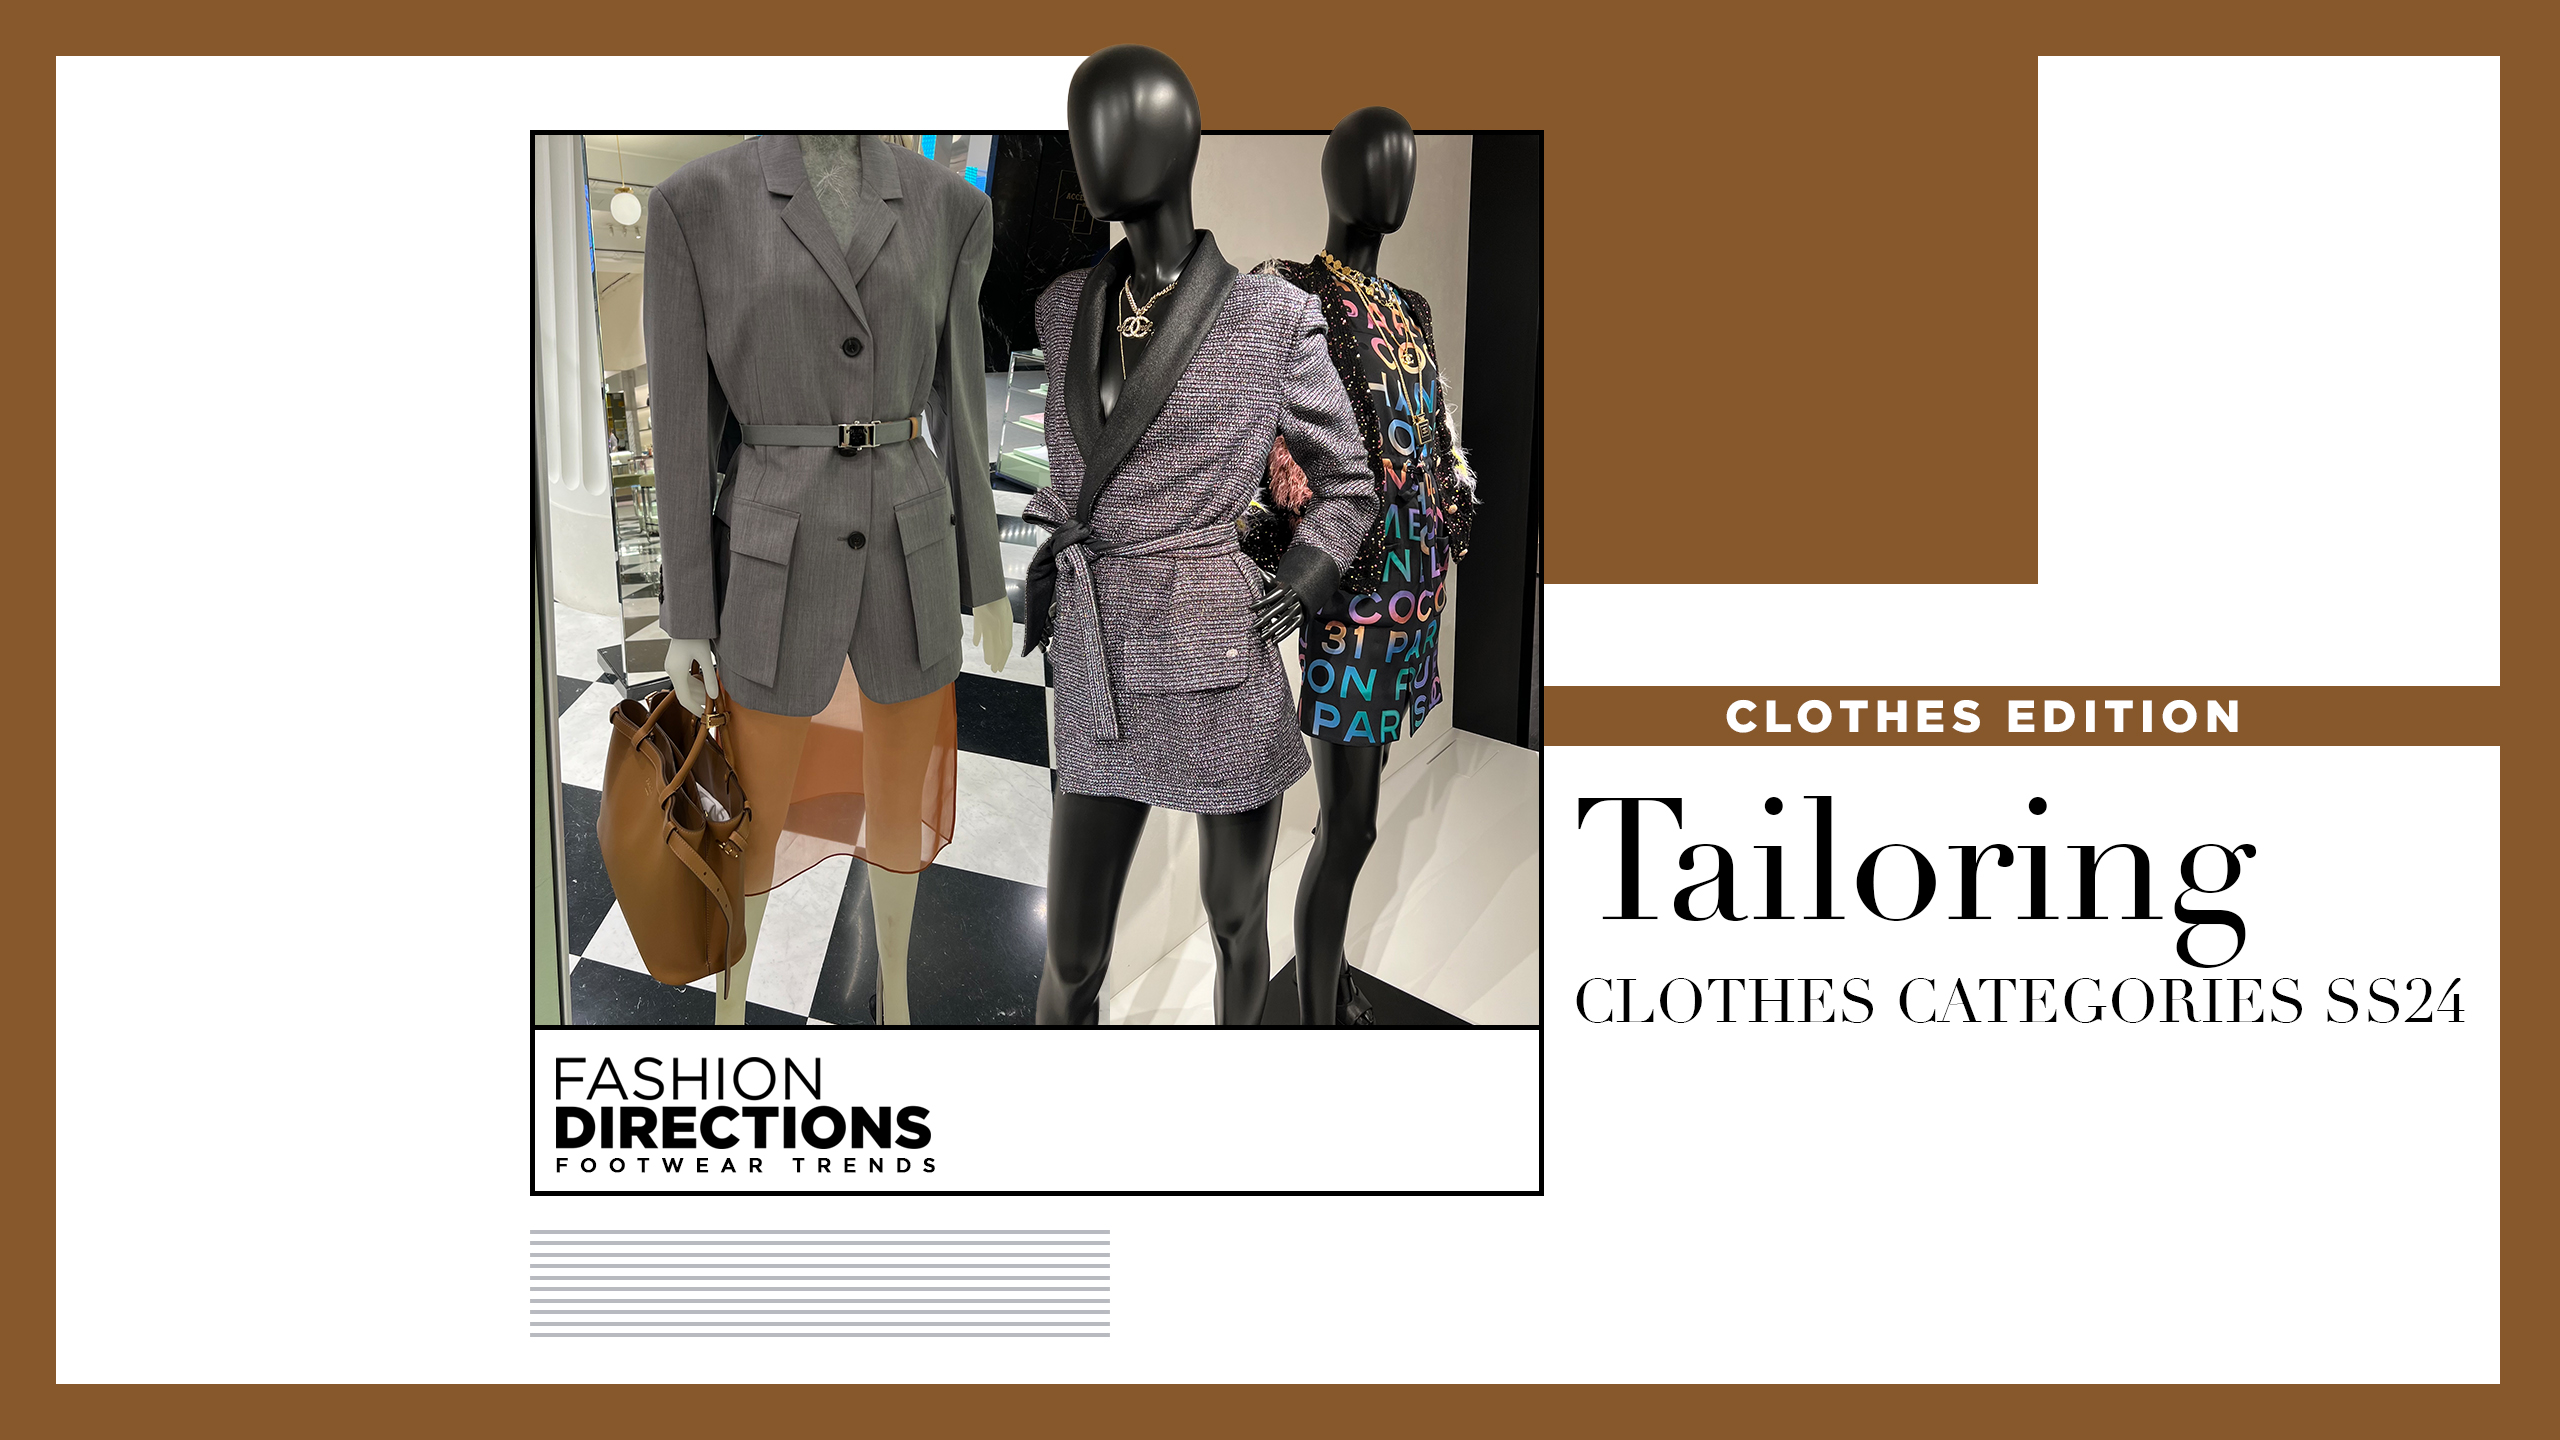 TAILORING CLOTHES CATEGORIES SS24